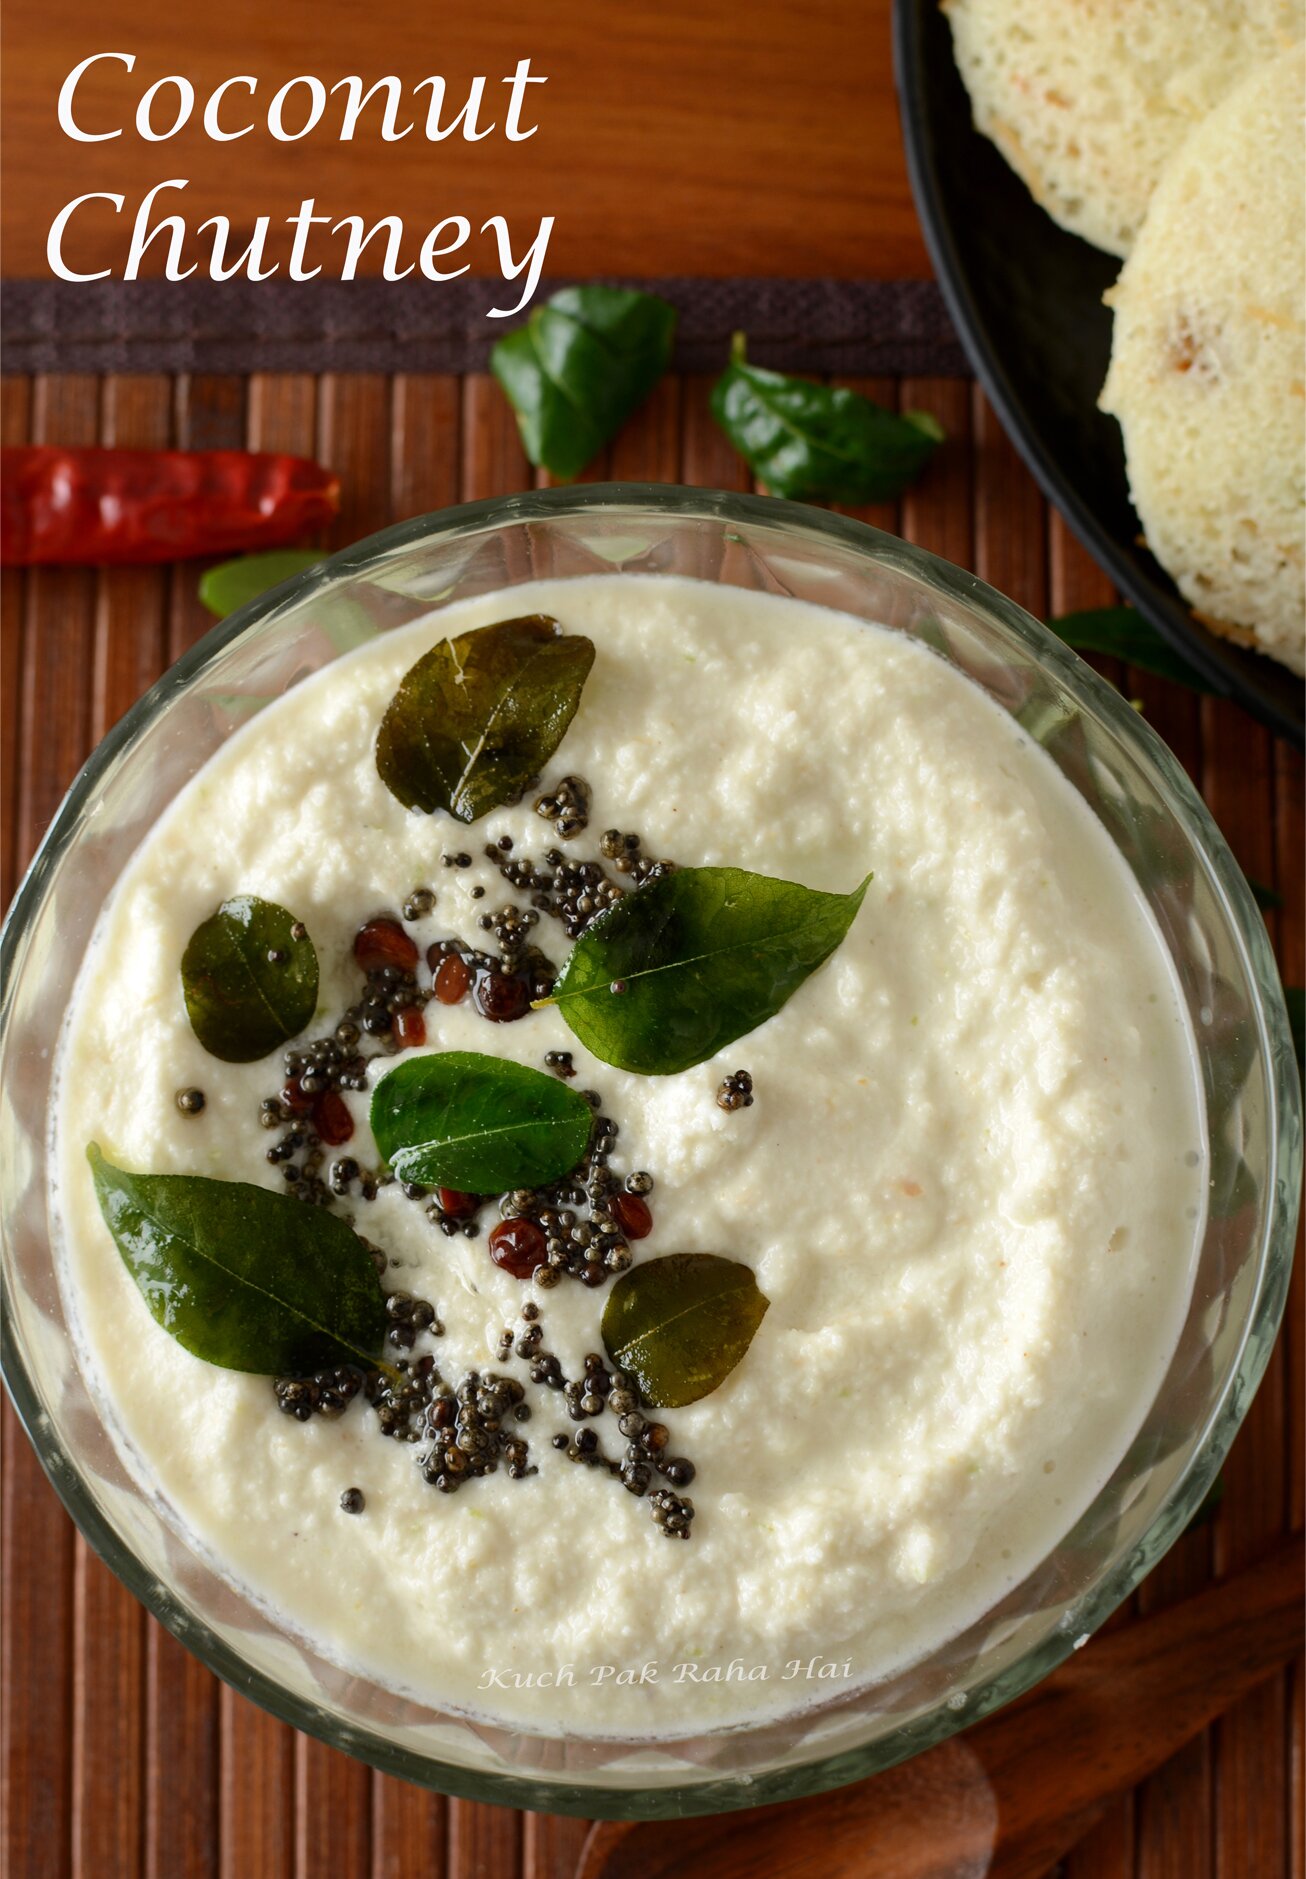 Coconut Chutney Recipe with Desiccated coconut